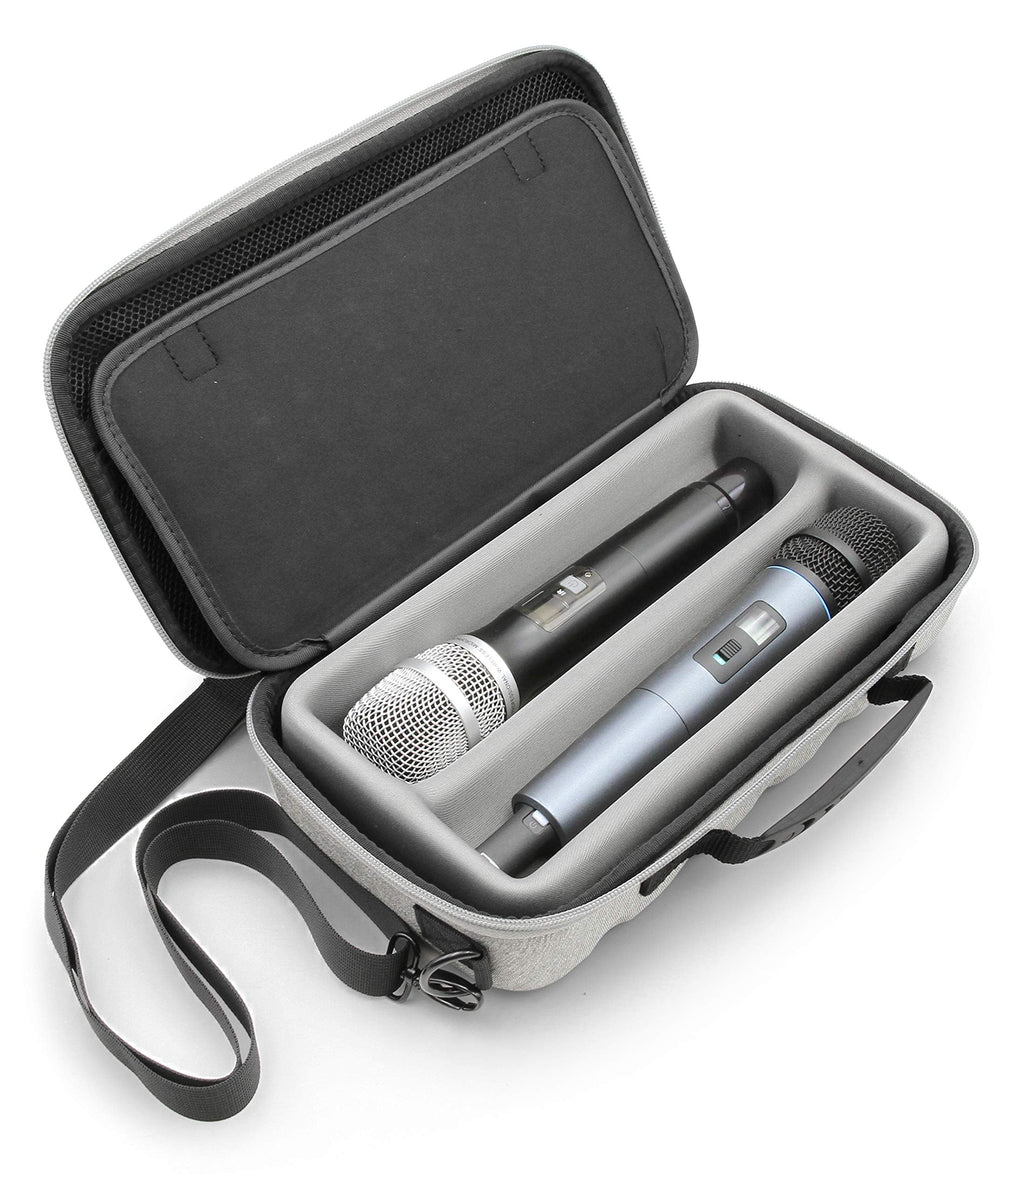  [AUSTRALIA] - CASEMATIX Dual Wireless Microphone Case for Wireless Mic System Compatible with Sennhesier, Shure Microphones and More, Dual Mic Bag with Shoulder Strap and Hard Shell Gray Exterior